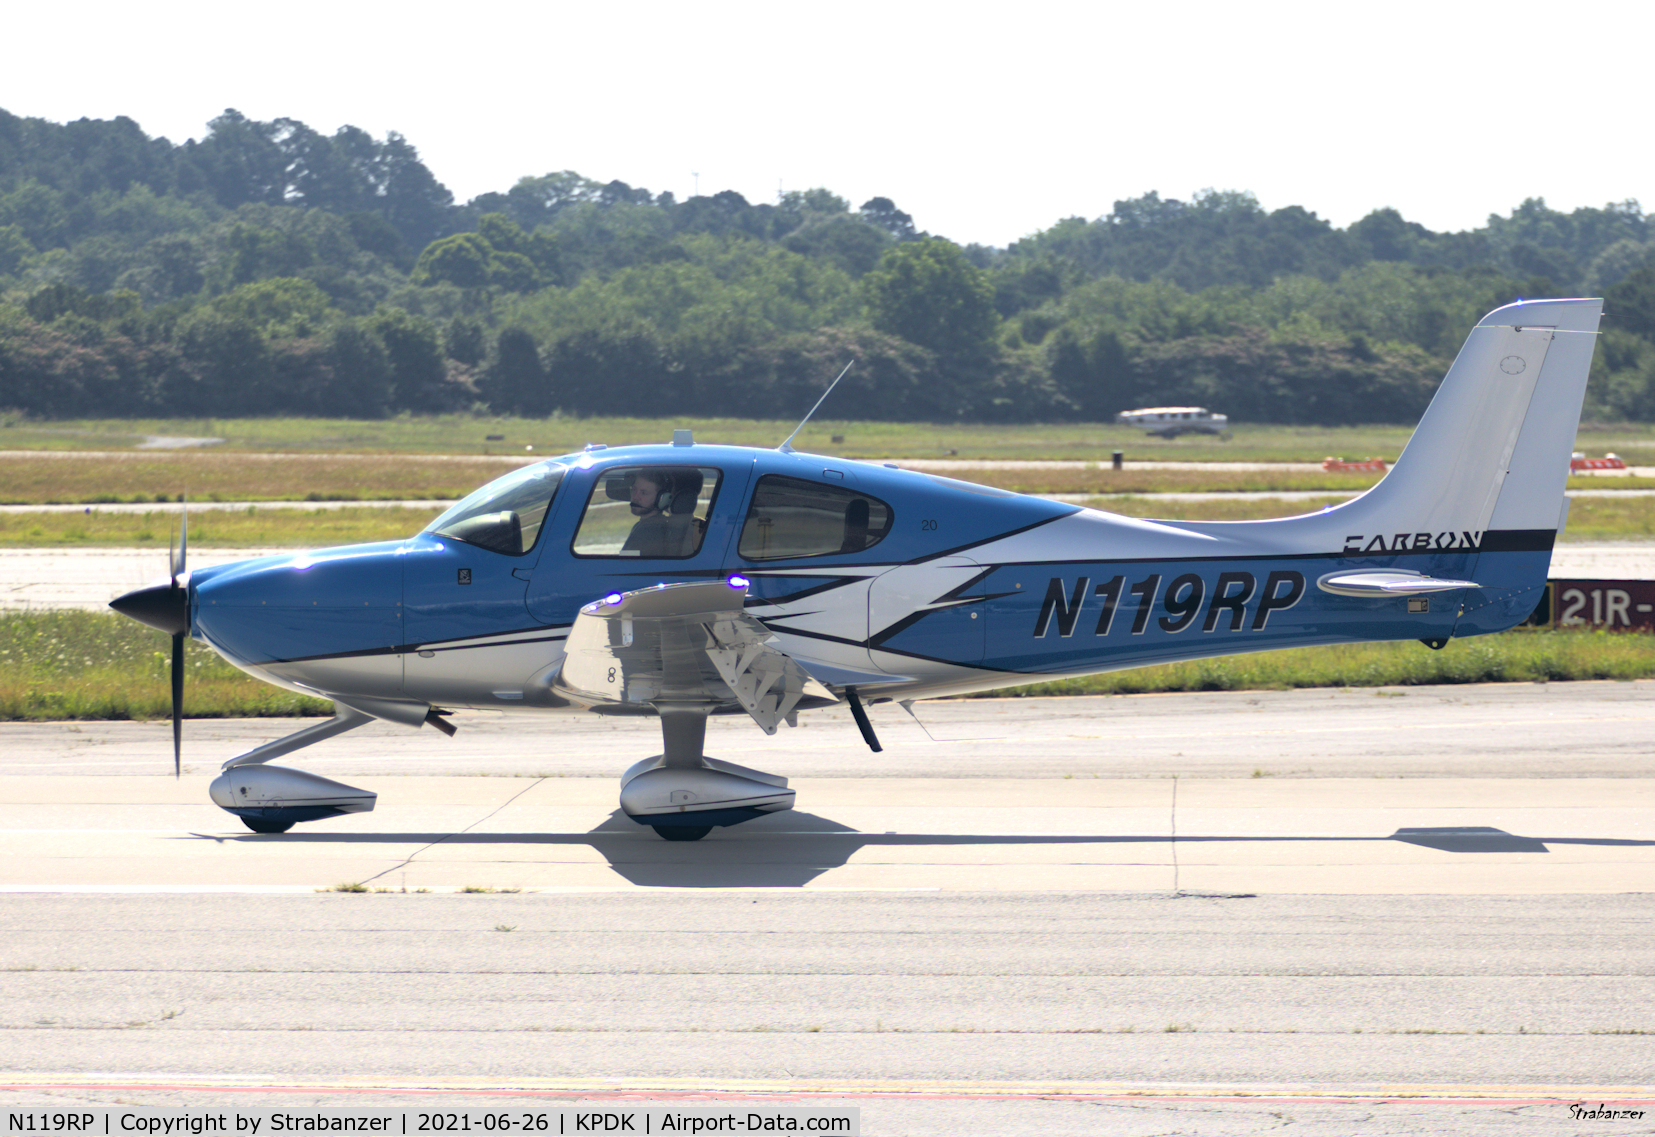 N119RP, 2018 Cirrus SR20-G6 C/N 2457, Taxiing in after a flight from Jackson County KJCY